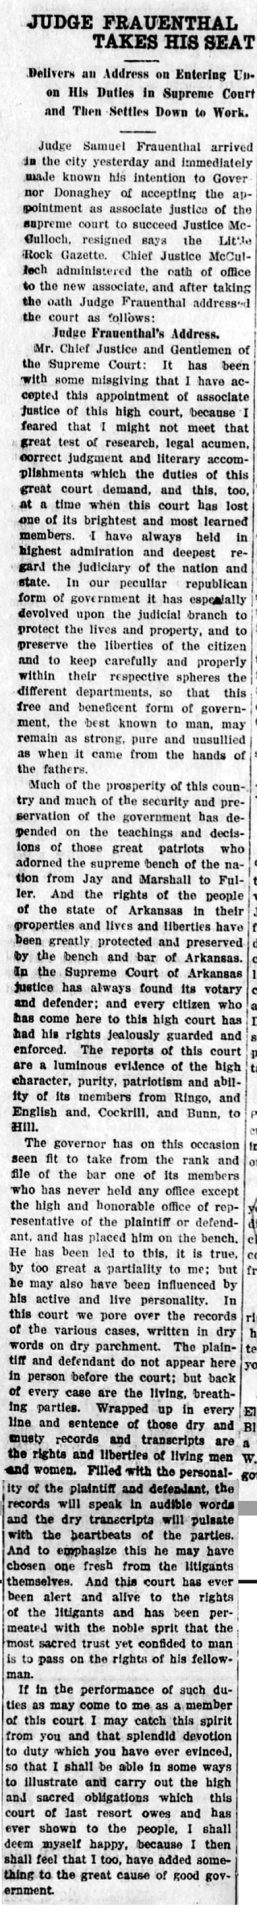 "Judge Frauenthal takes his seat" newspaper clipping